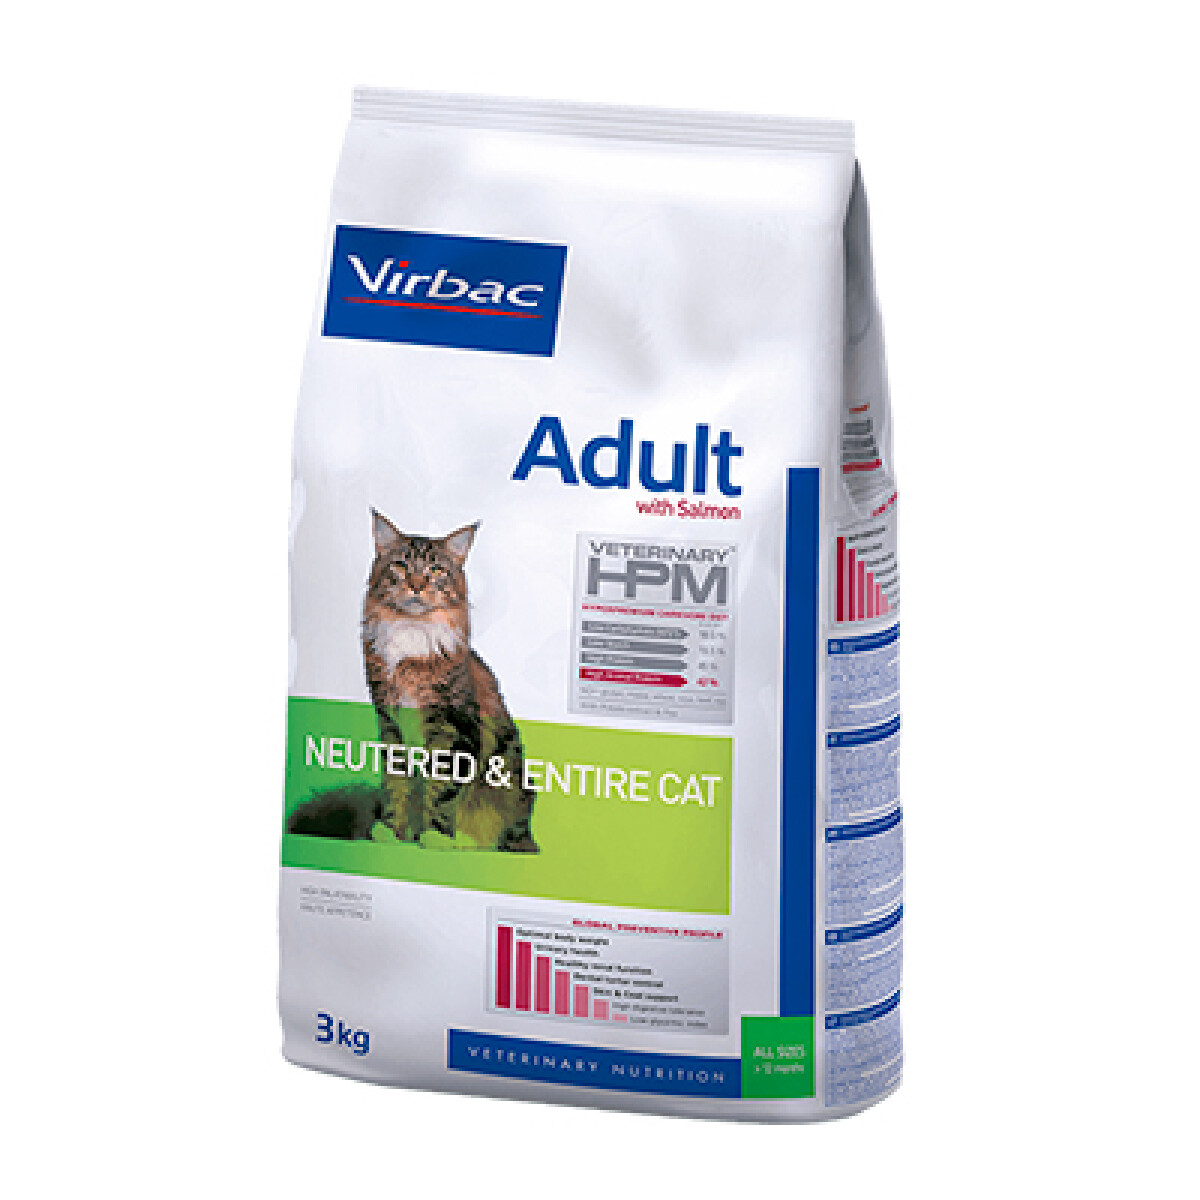 VIRBAC CAT ADULT WITH SALMON NEUTERED & ENTIRE 3KG - Unica 